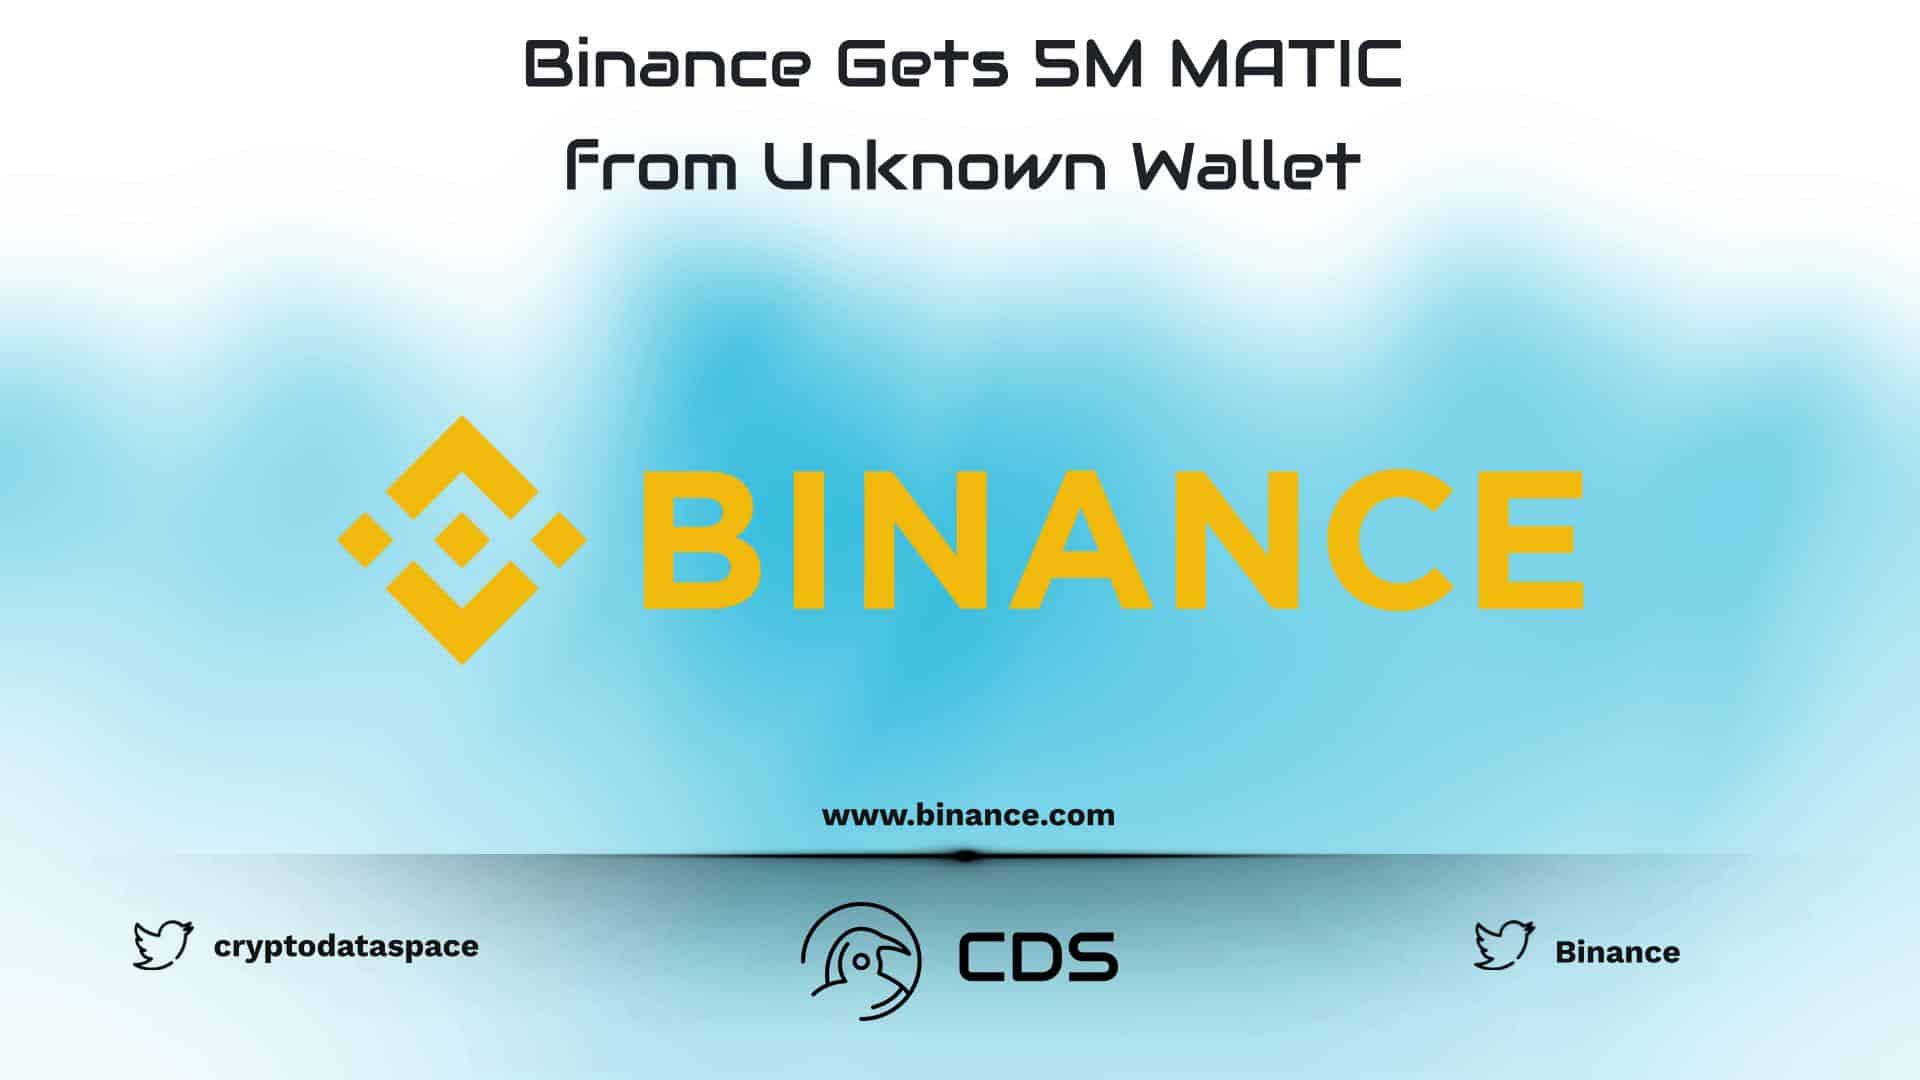 Binance Gets 5M MATIC from Unknown Wallet